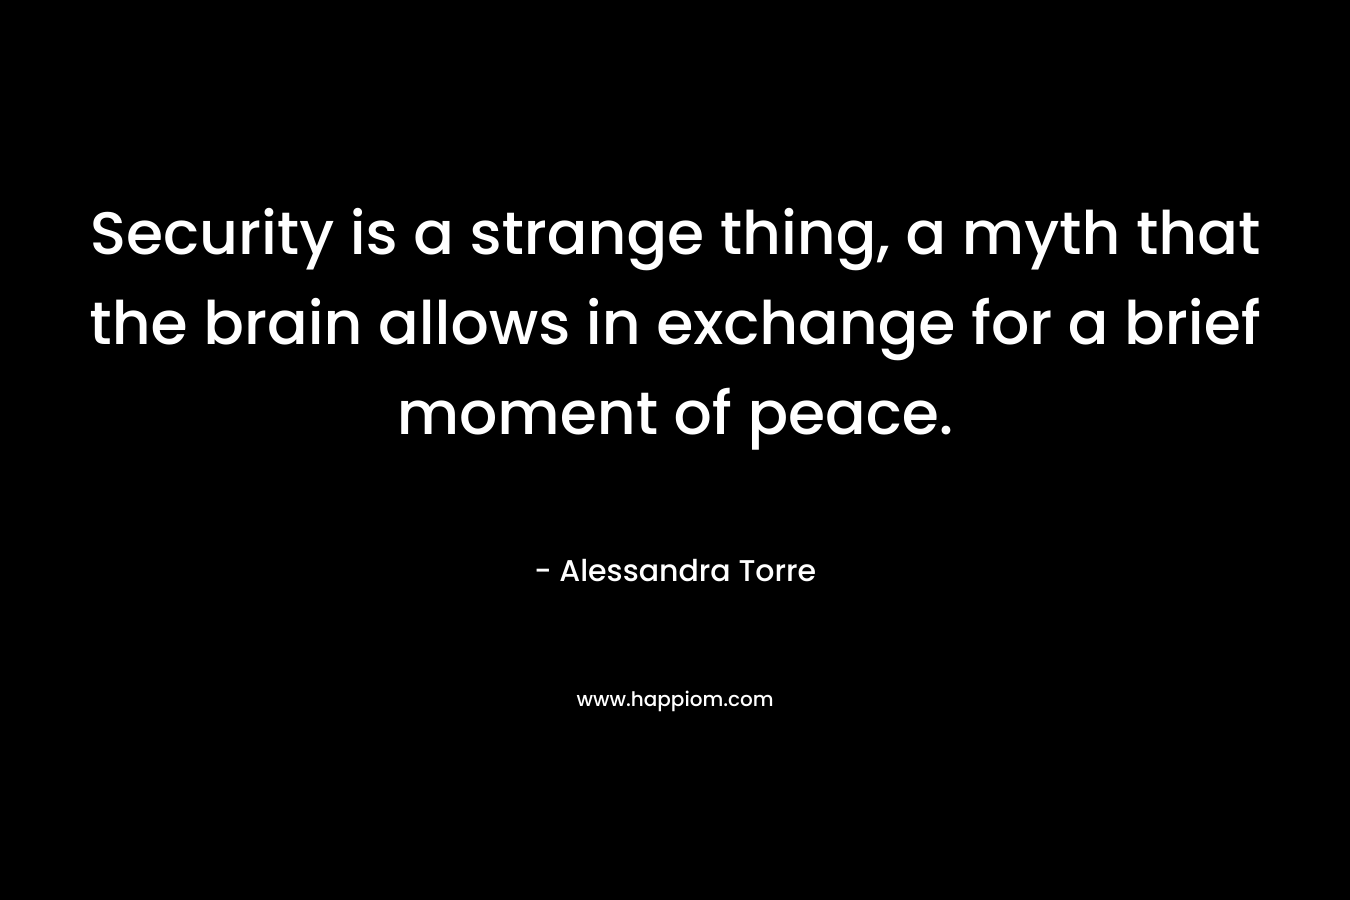 Security is a strange thing, a myth that the brain allows in exchange for a brief moment of peace. – Alessandra Torre